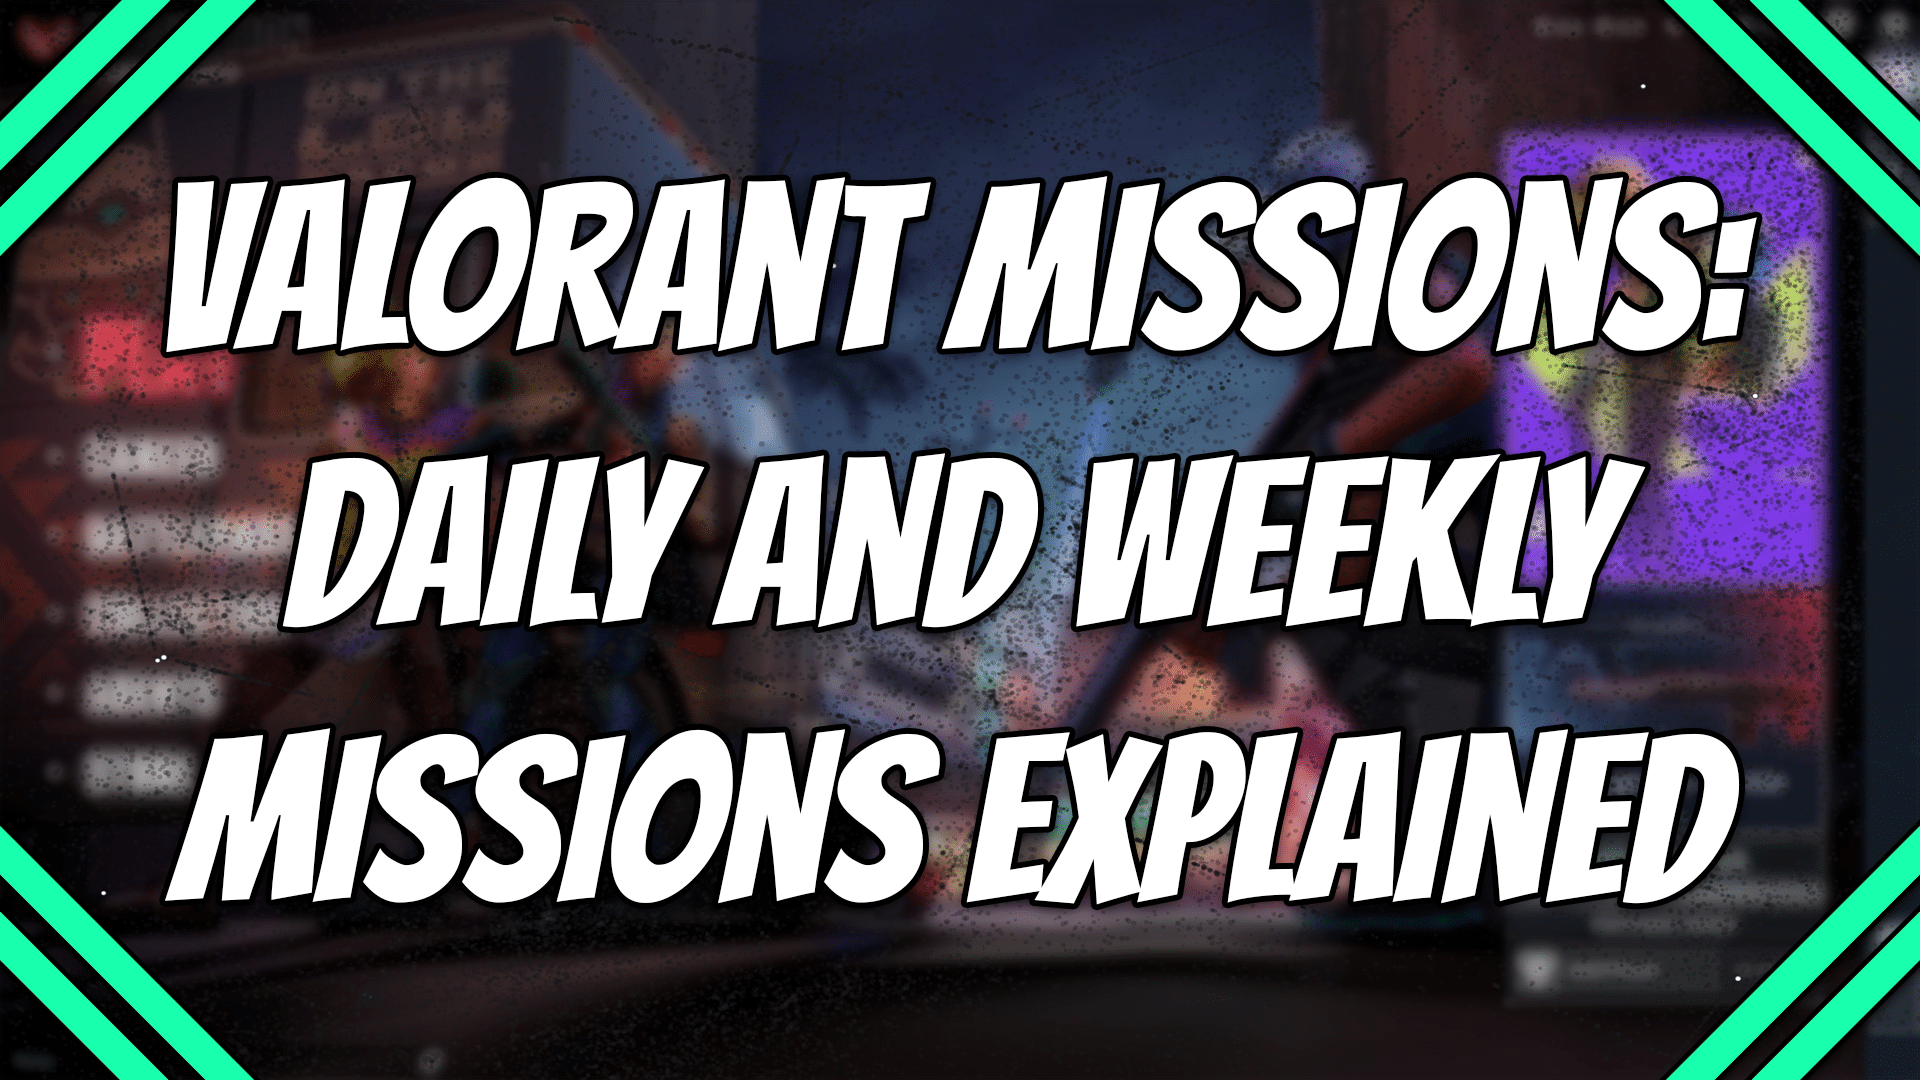 Valorant missions - Daily and weekly missions explained title card